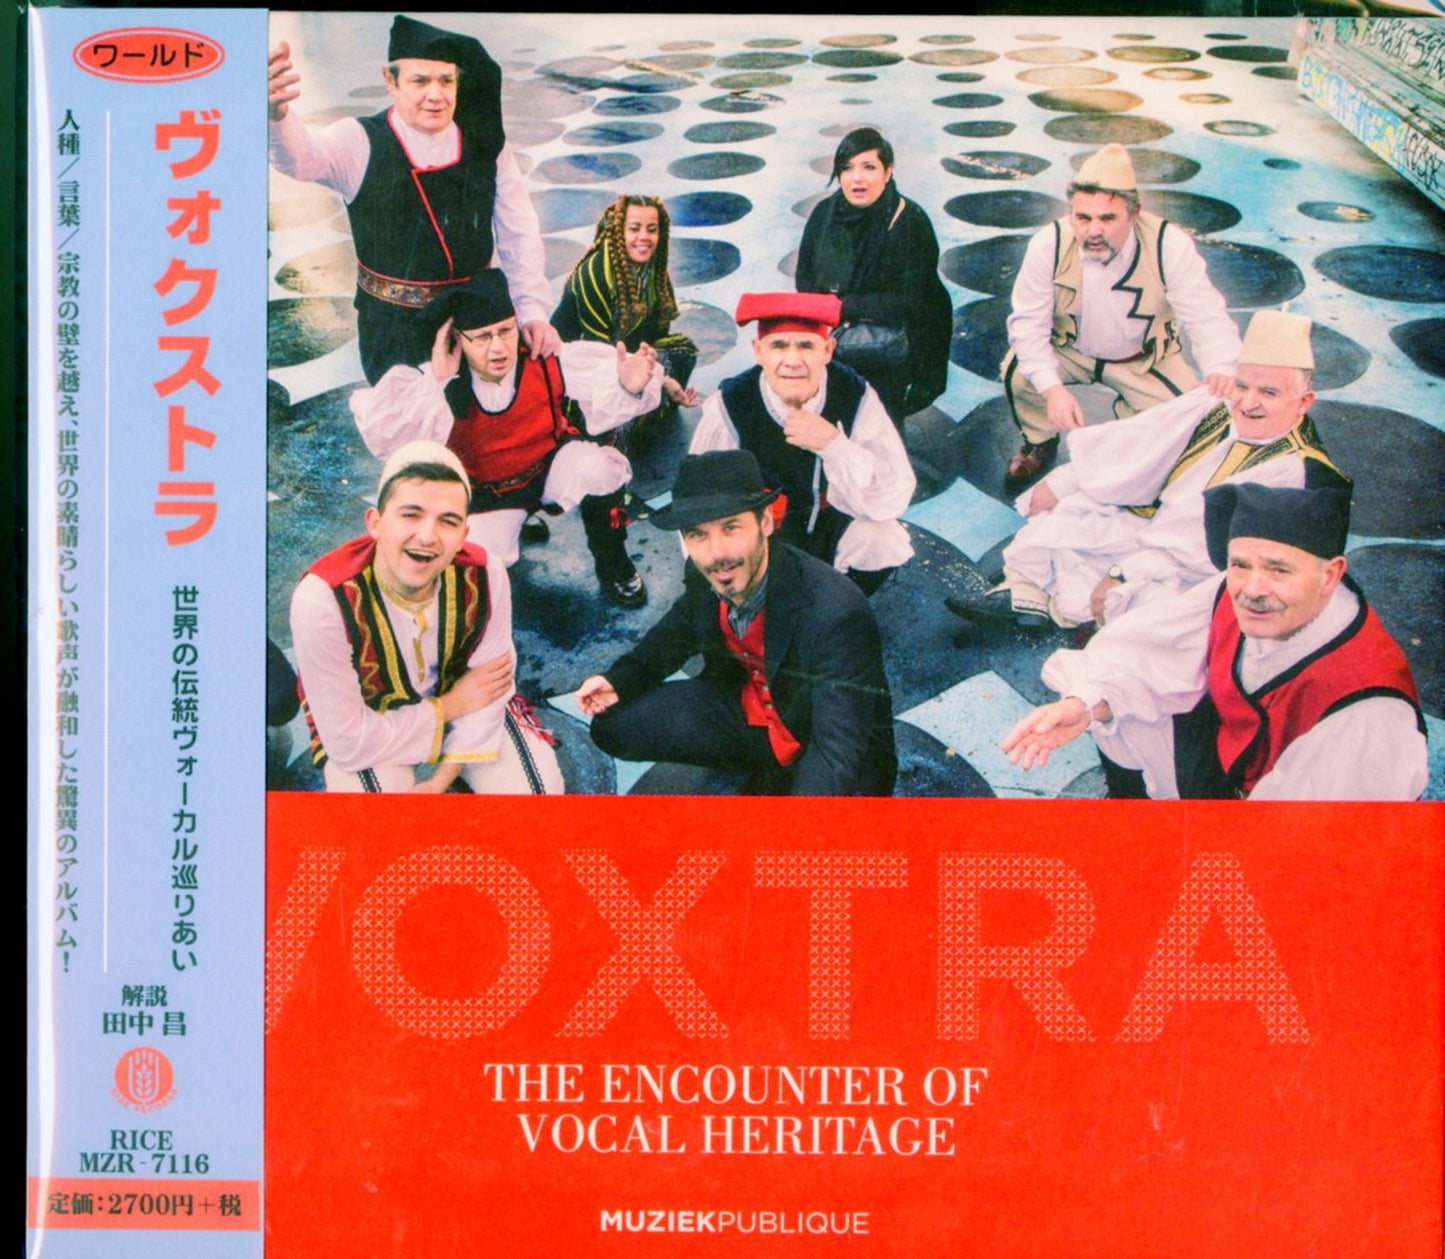 Voxtra - The Encounter Of Vocal Heritage - Japan CD